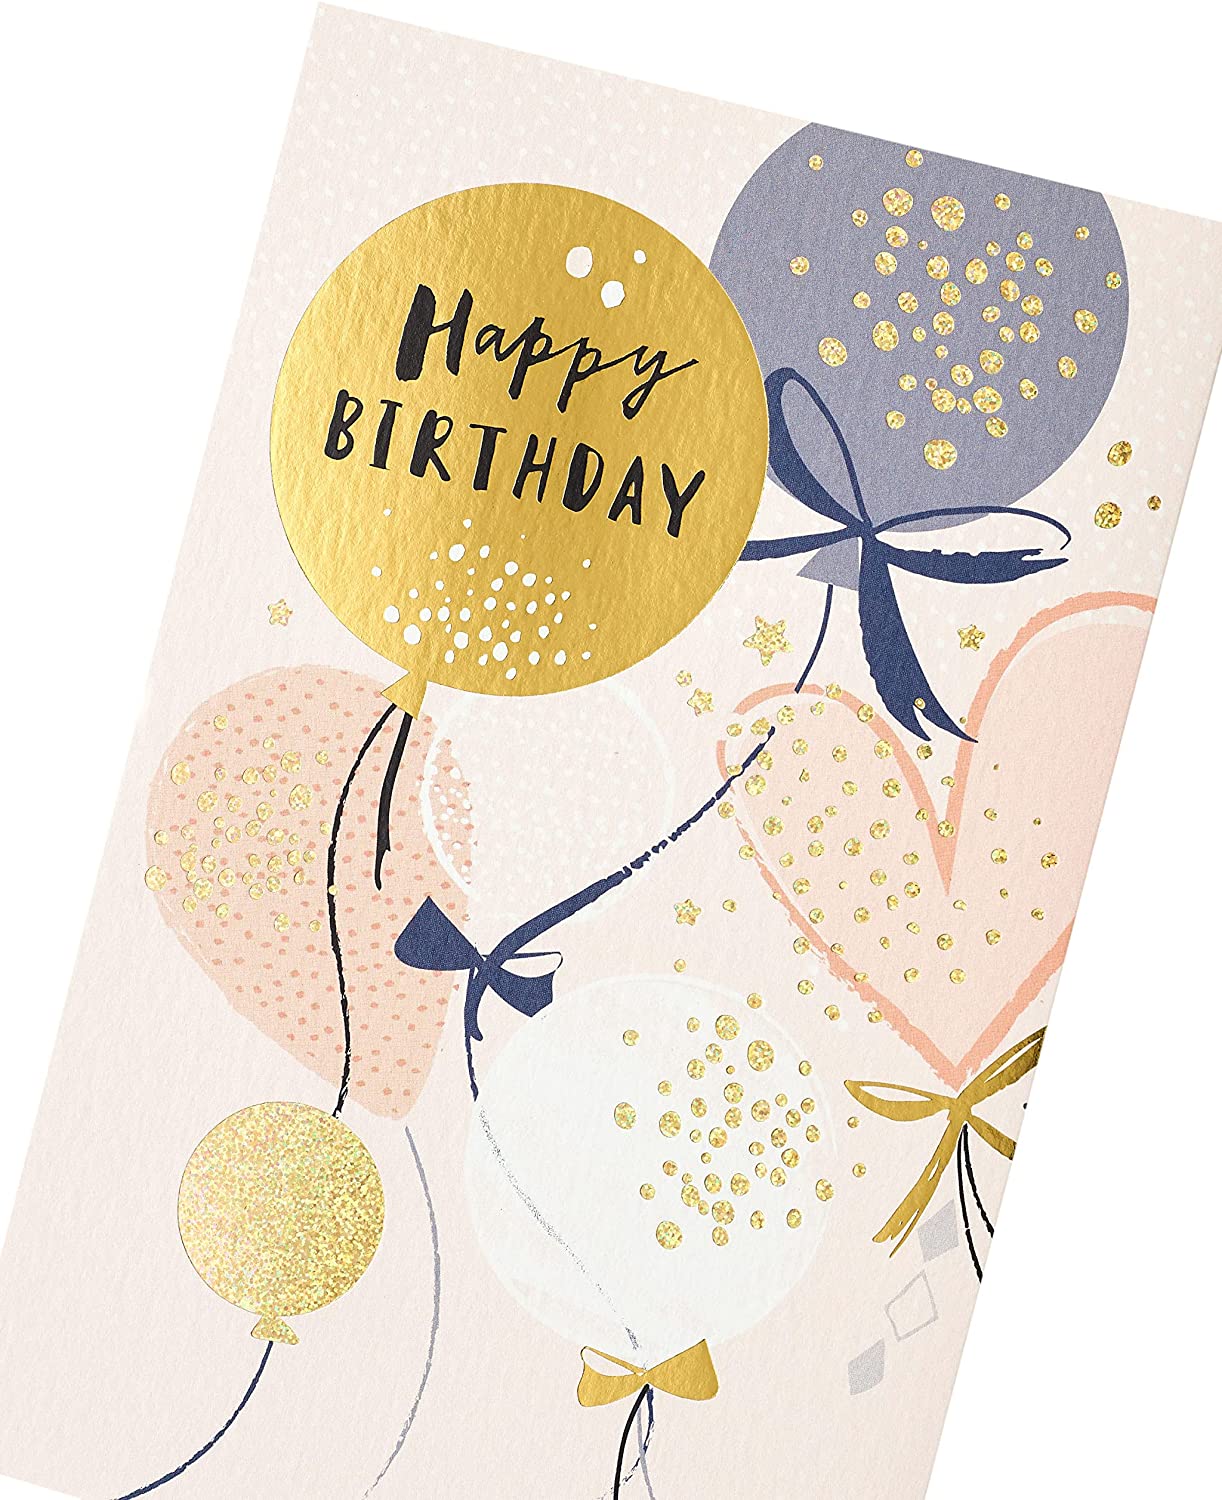 Pink and Gold Balloons Birthday Card